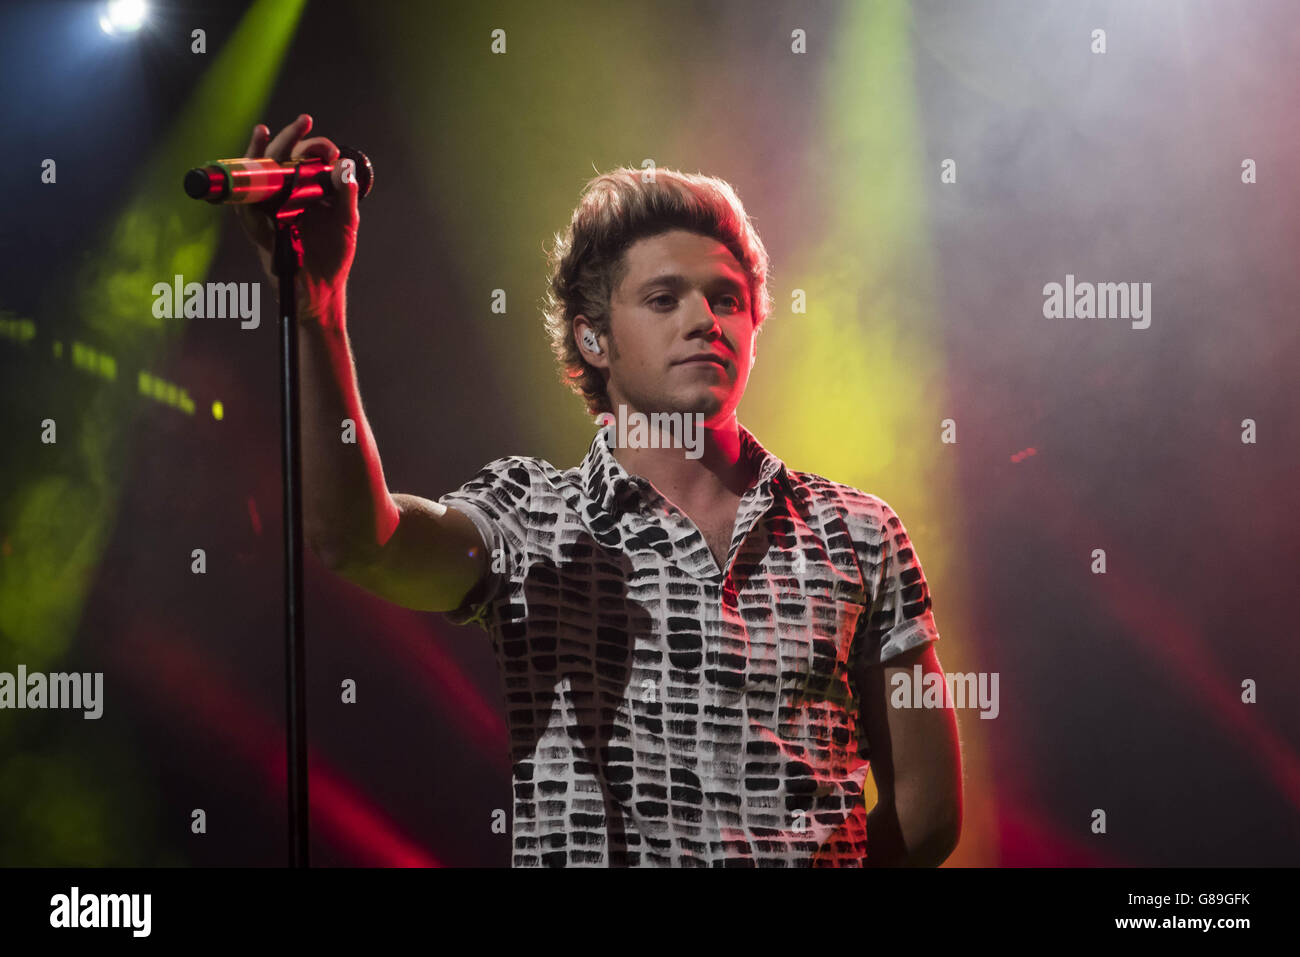 Apple Music Festival 2015 - London. Niall Horan of One Direction performing at the Apple Music festival at the Roundhouse in Camden, London. Stock Photo